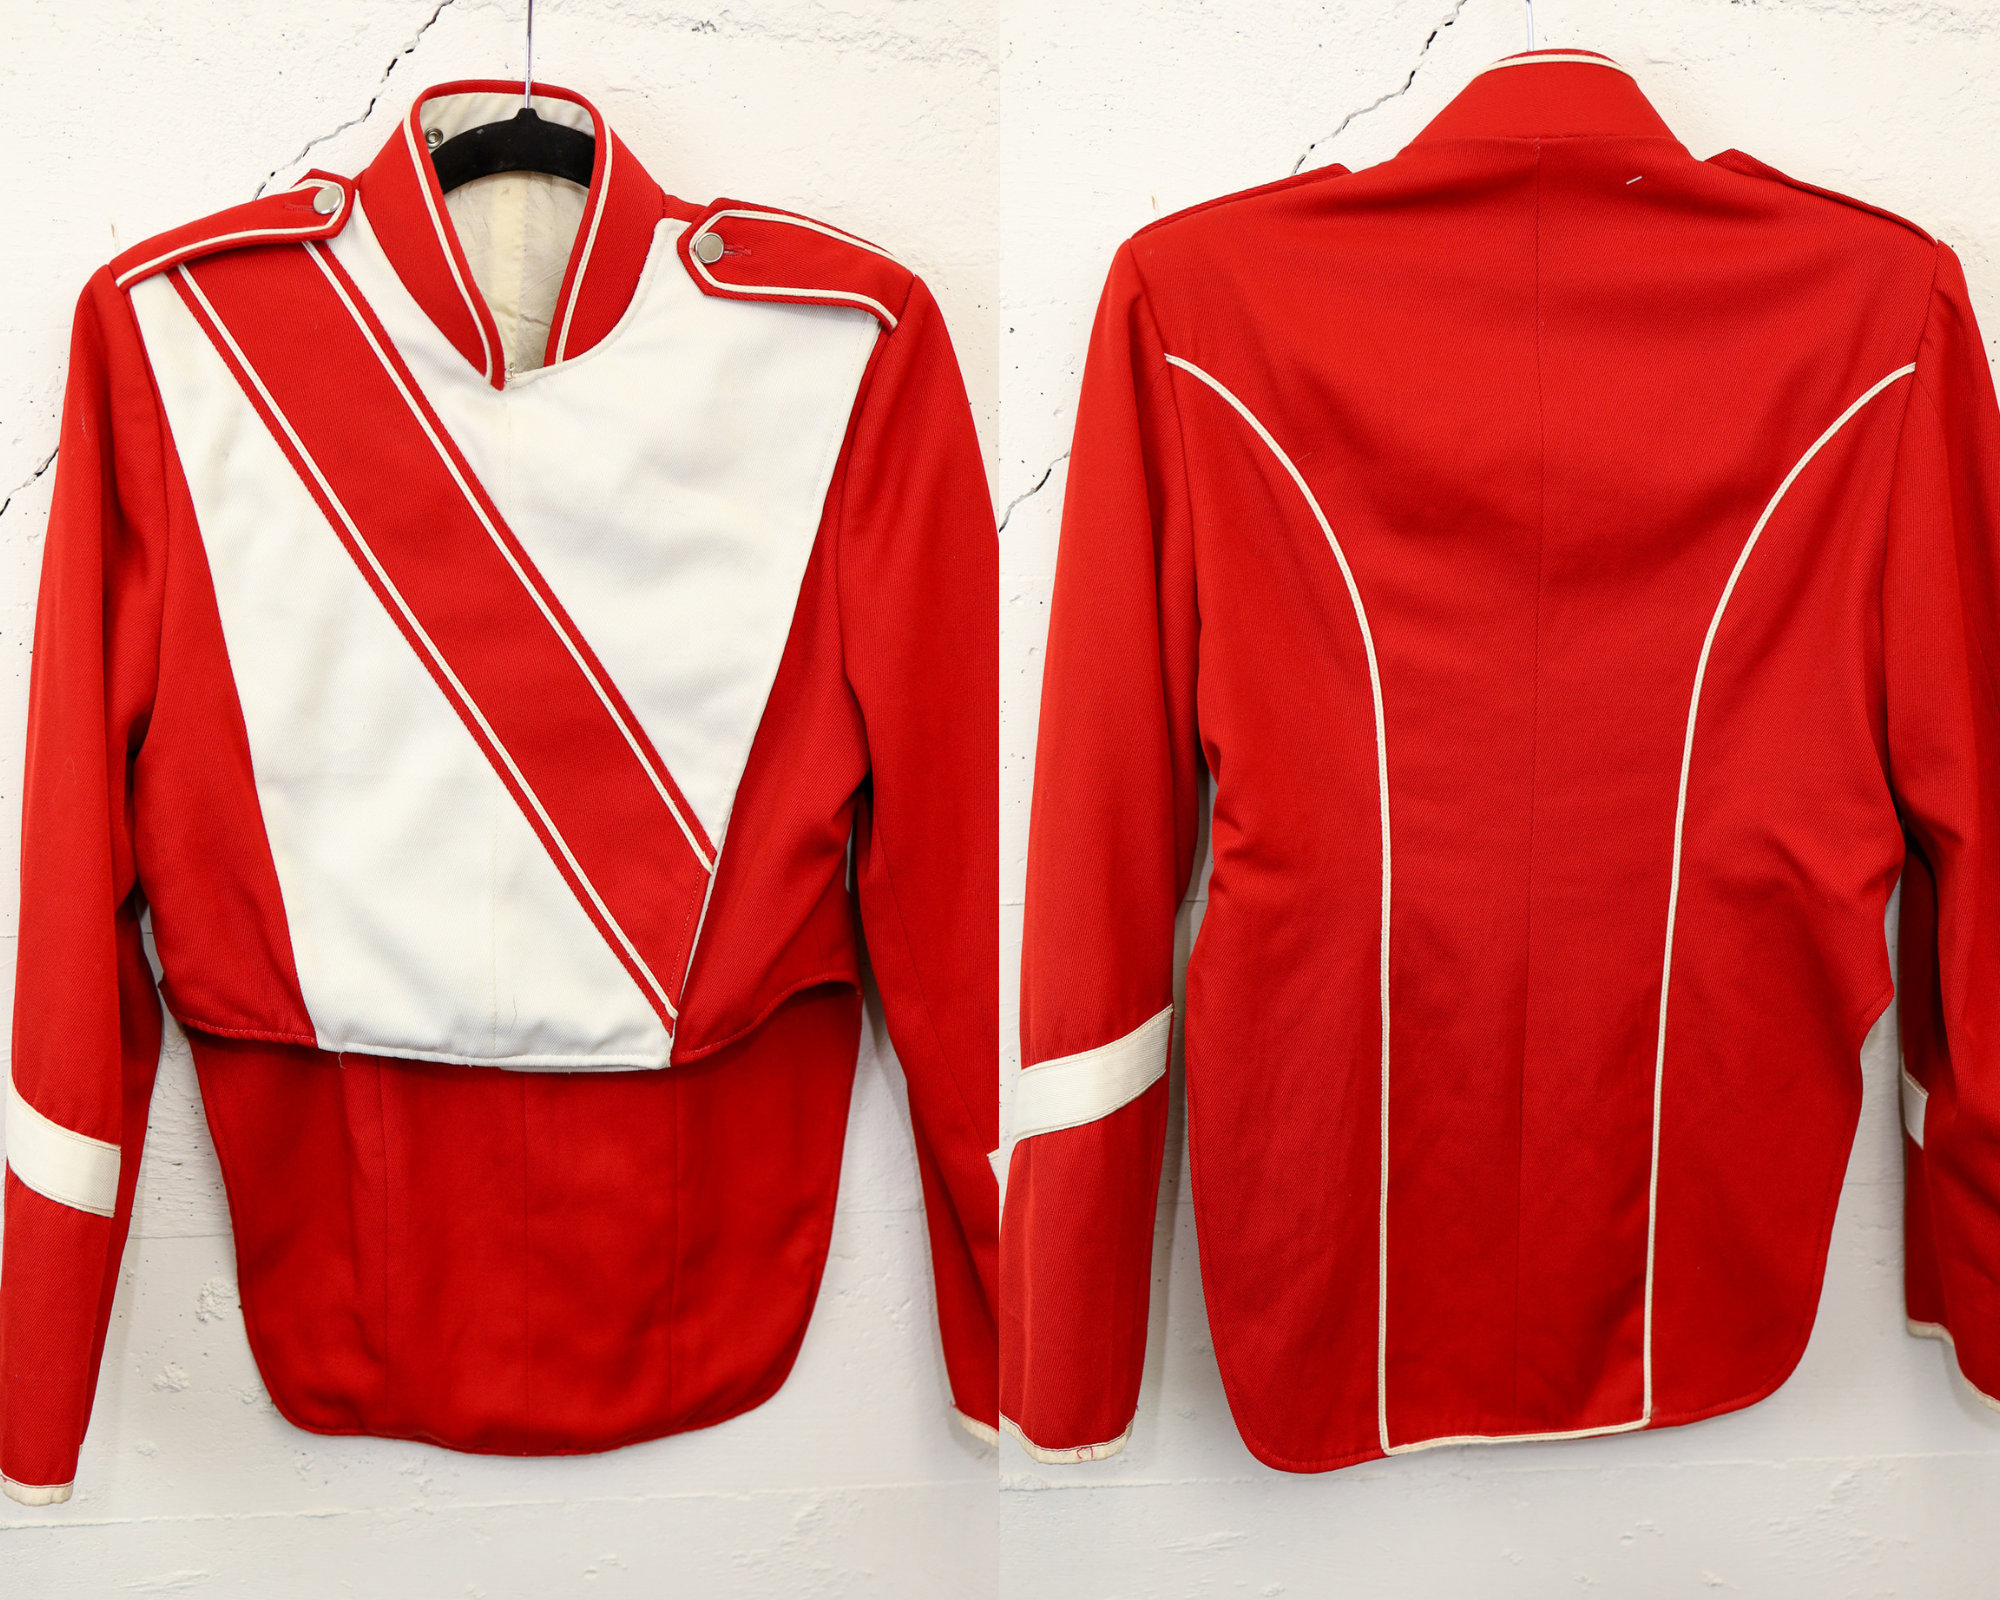 Vintage 1970s/1980s Marching Band Jacket